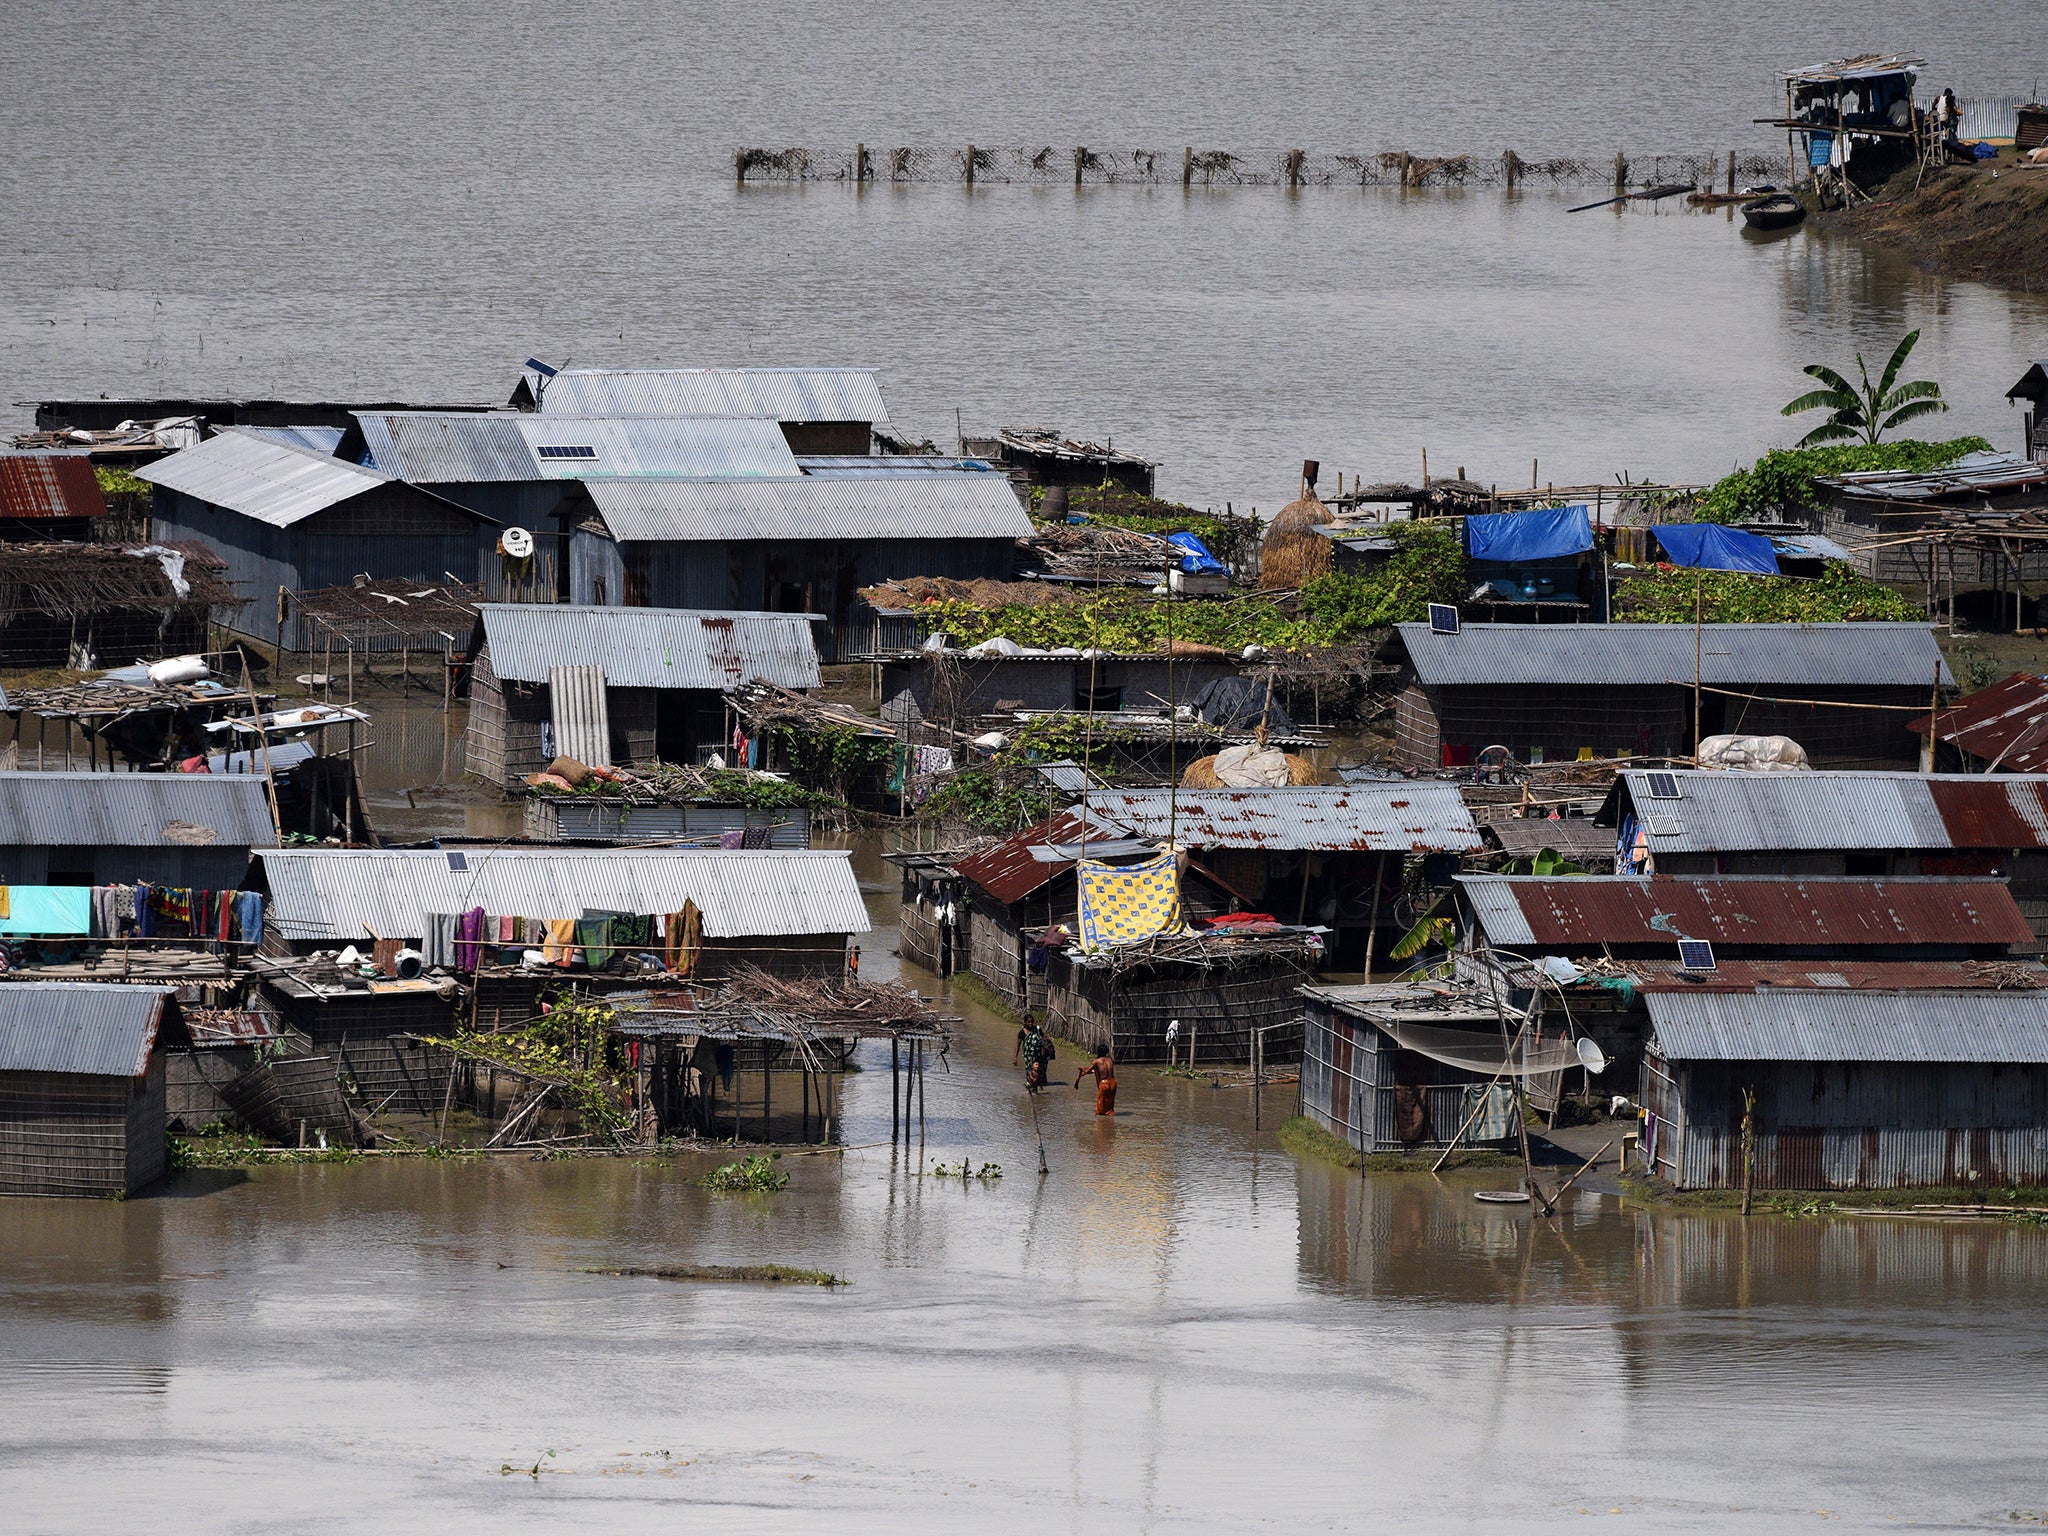 Partially submerged houses are seen at a flood-affected village in Morigaon district in the northeastern state of Assam, India.